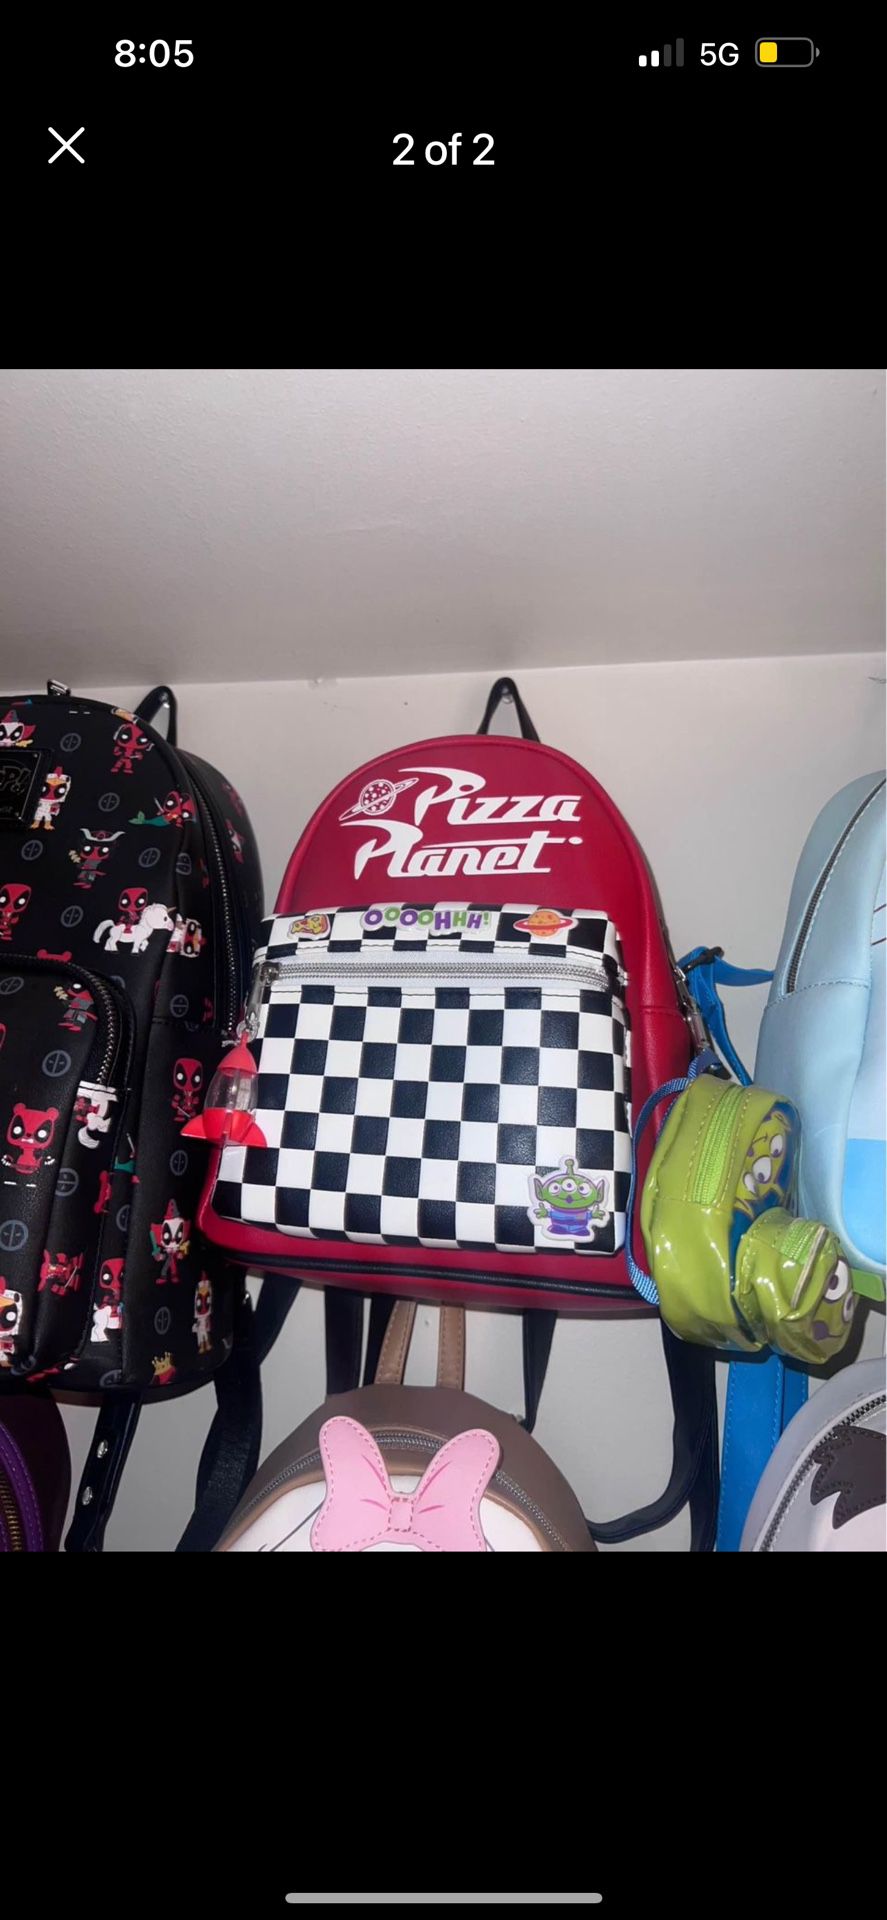 Pizza Planet Loungefly + Mini Alien Keychain Backpack 